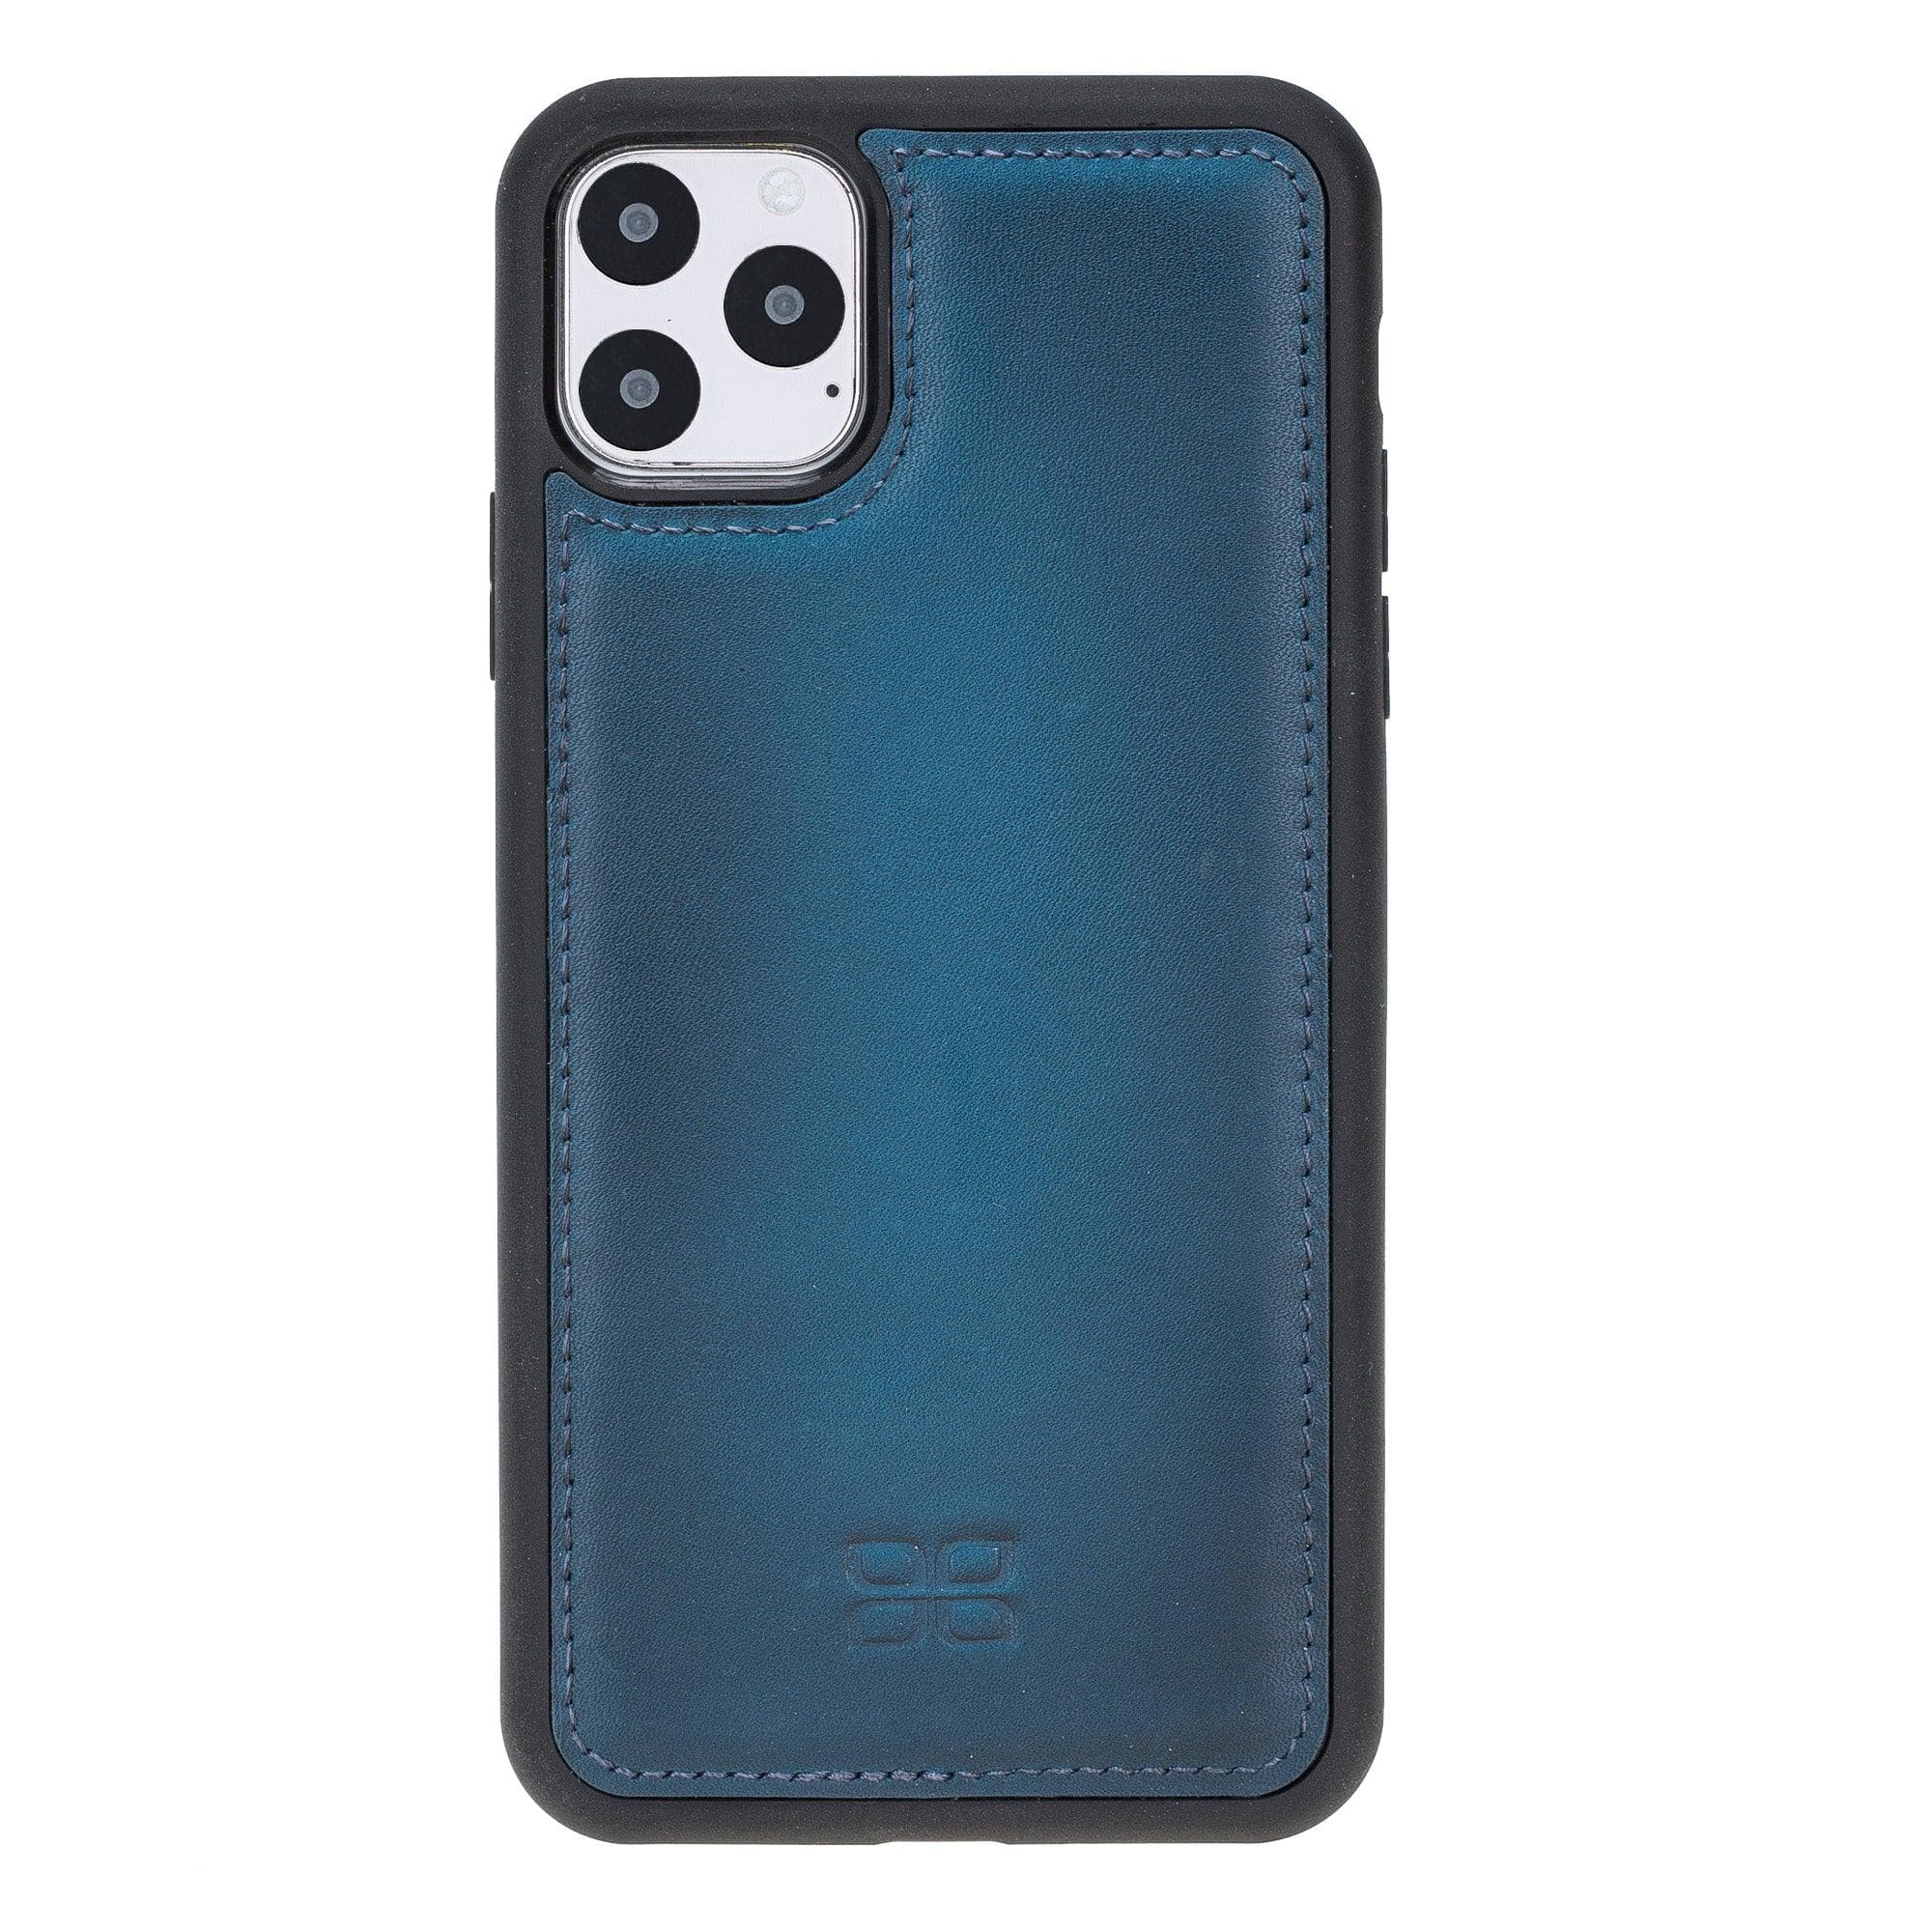 Flex Cover Leather Back Cover Case for Apple iPhone 11 Series iPhone 11 Promax 6.5" / Blue Bouletta LTD